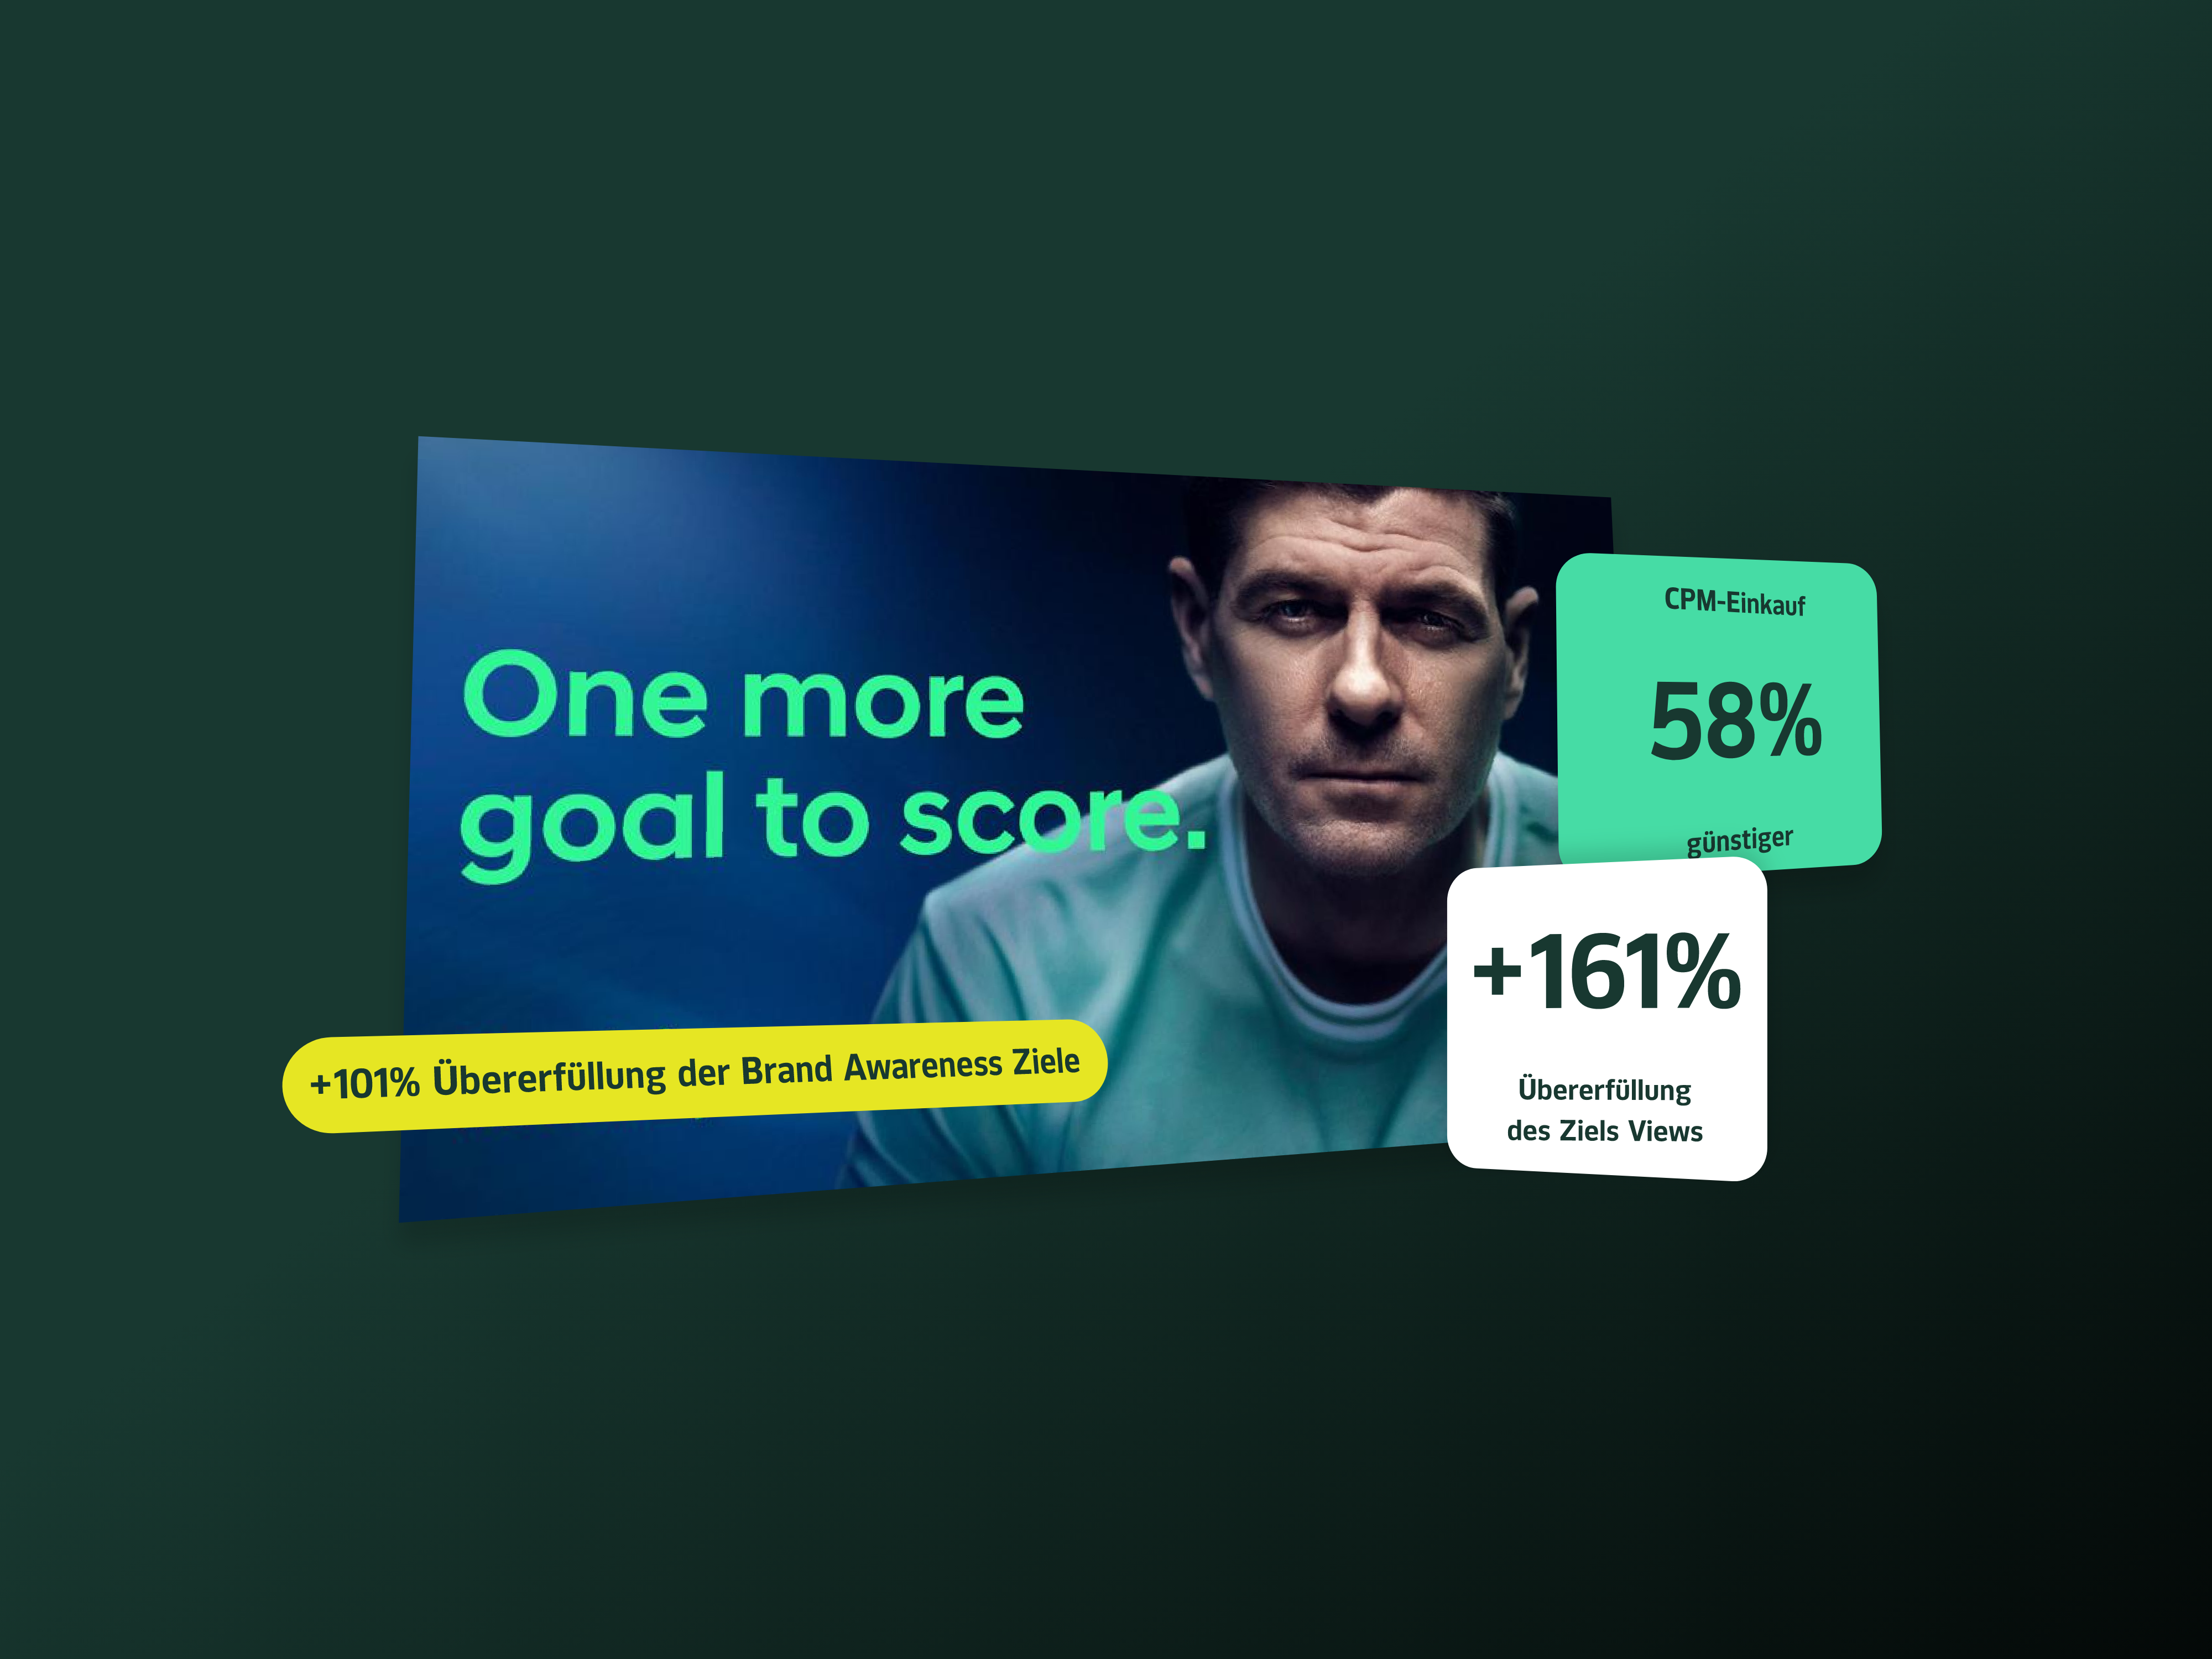 Image of a clip of the campaign created by Jung von Matt Netzeffekt between Hyundai and Steven Gerrard. The slogan "One more goal to score" can be read.